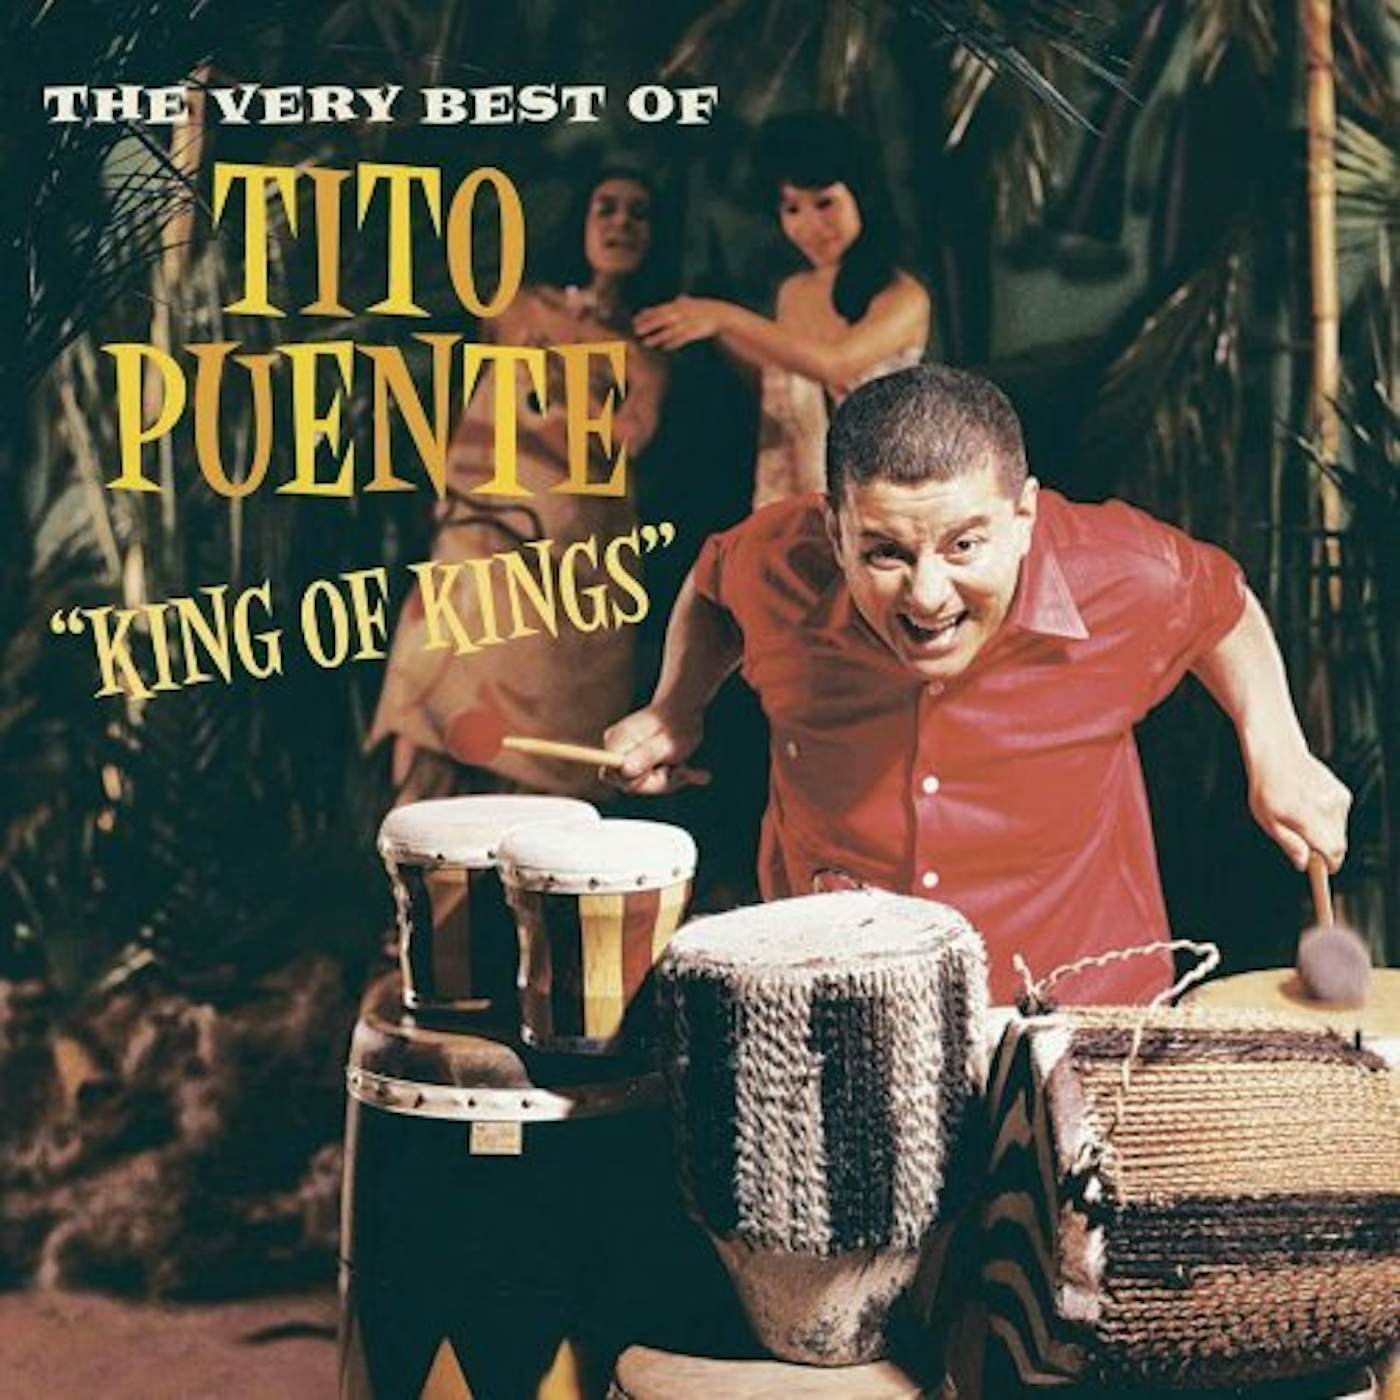 Tito Puente KING OF KINGS: THE VERY BEST OF CD